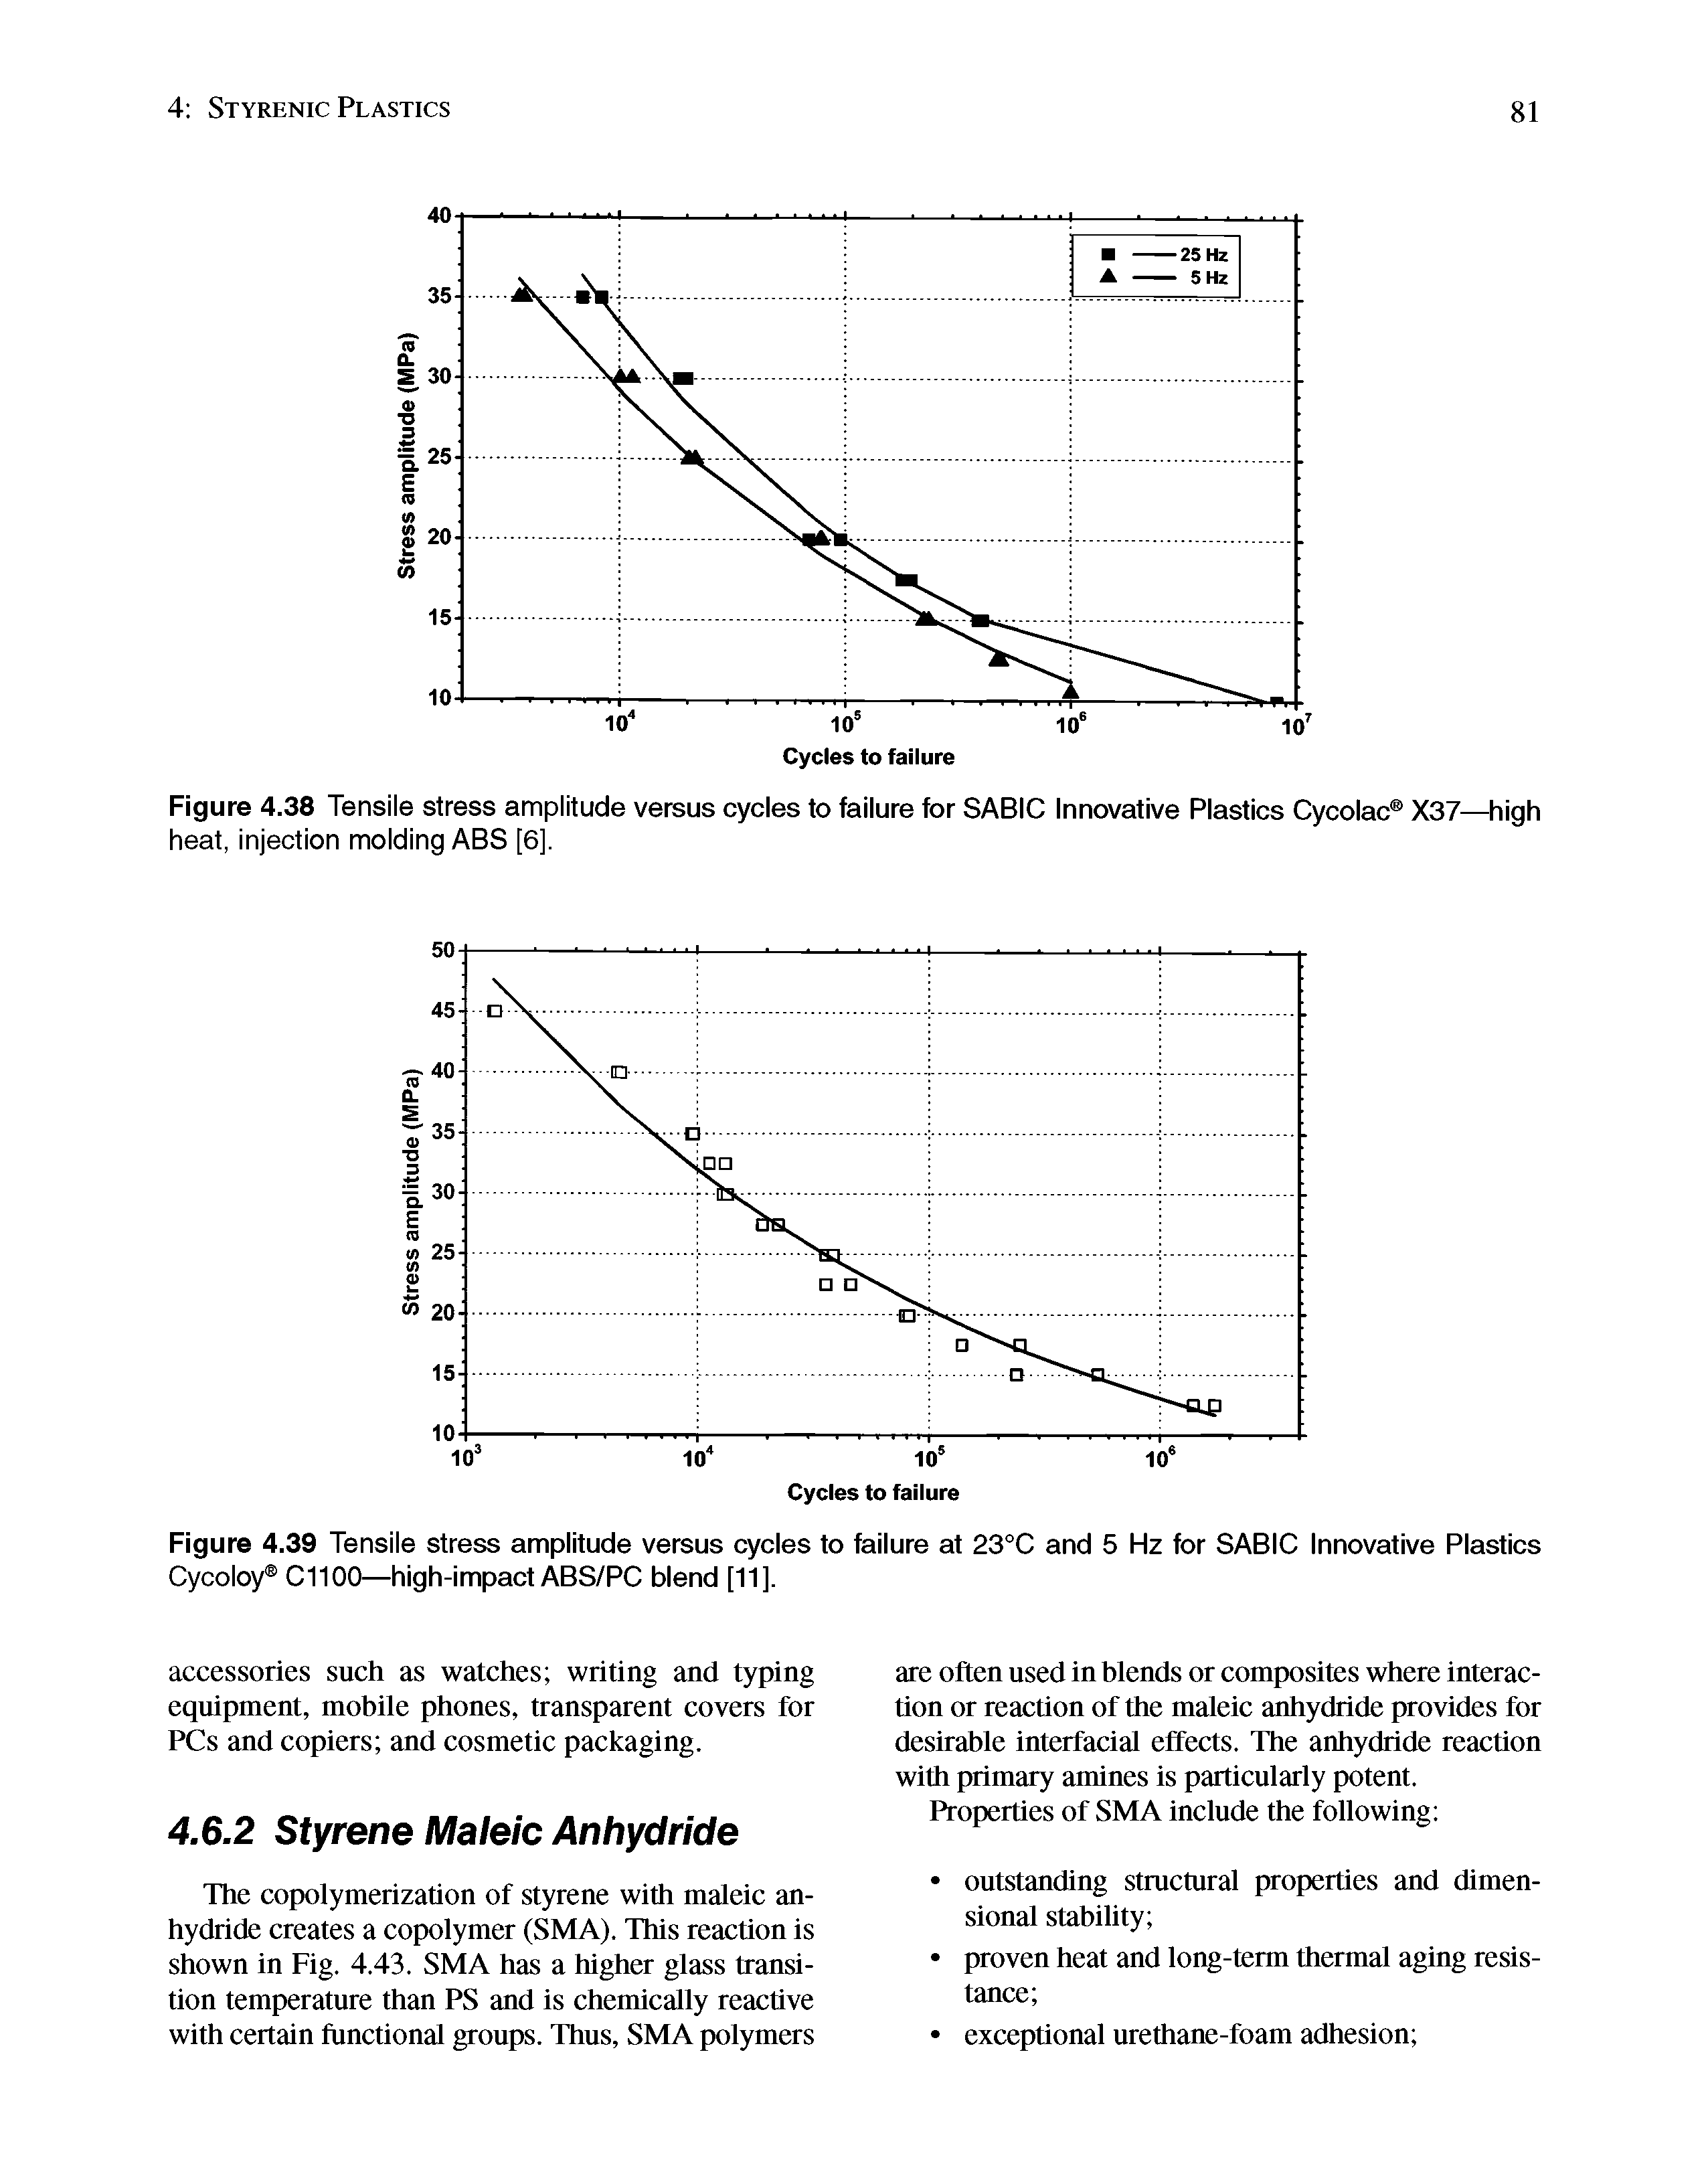 Figure 4.39 Tensile stress amplitude versus cycles to failure at 23 C and 5 Hz for SABIC Innovative Plastics Cycoloy C1100—high-impact ABS/PC blend [11].